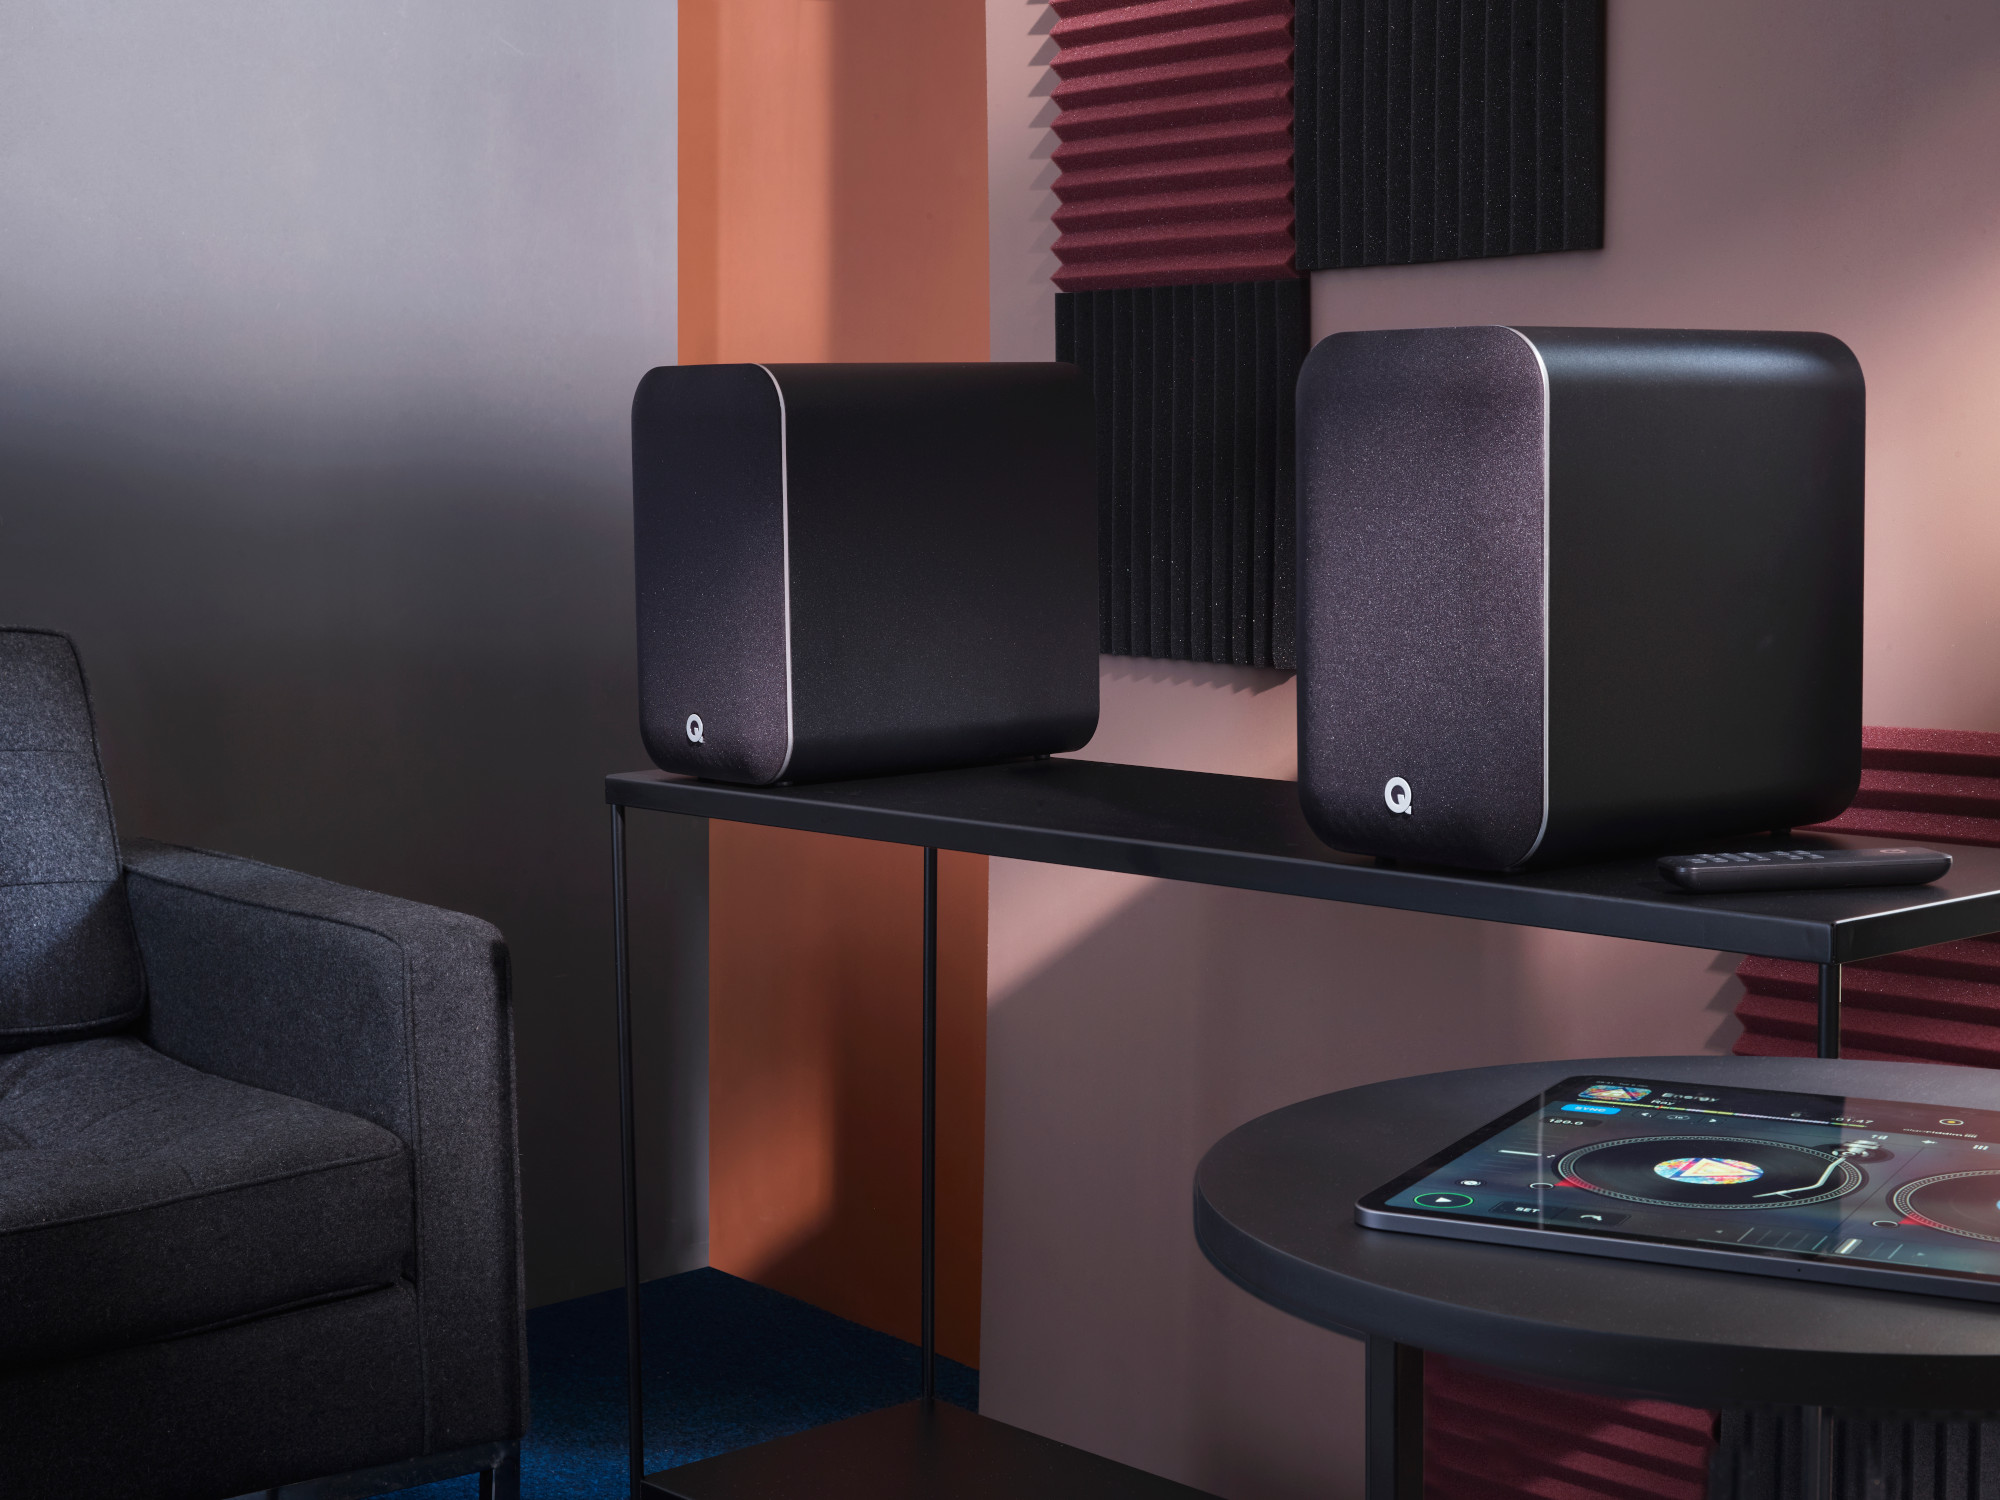 Q ACOUSTICS M20 in the right place